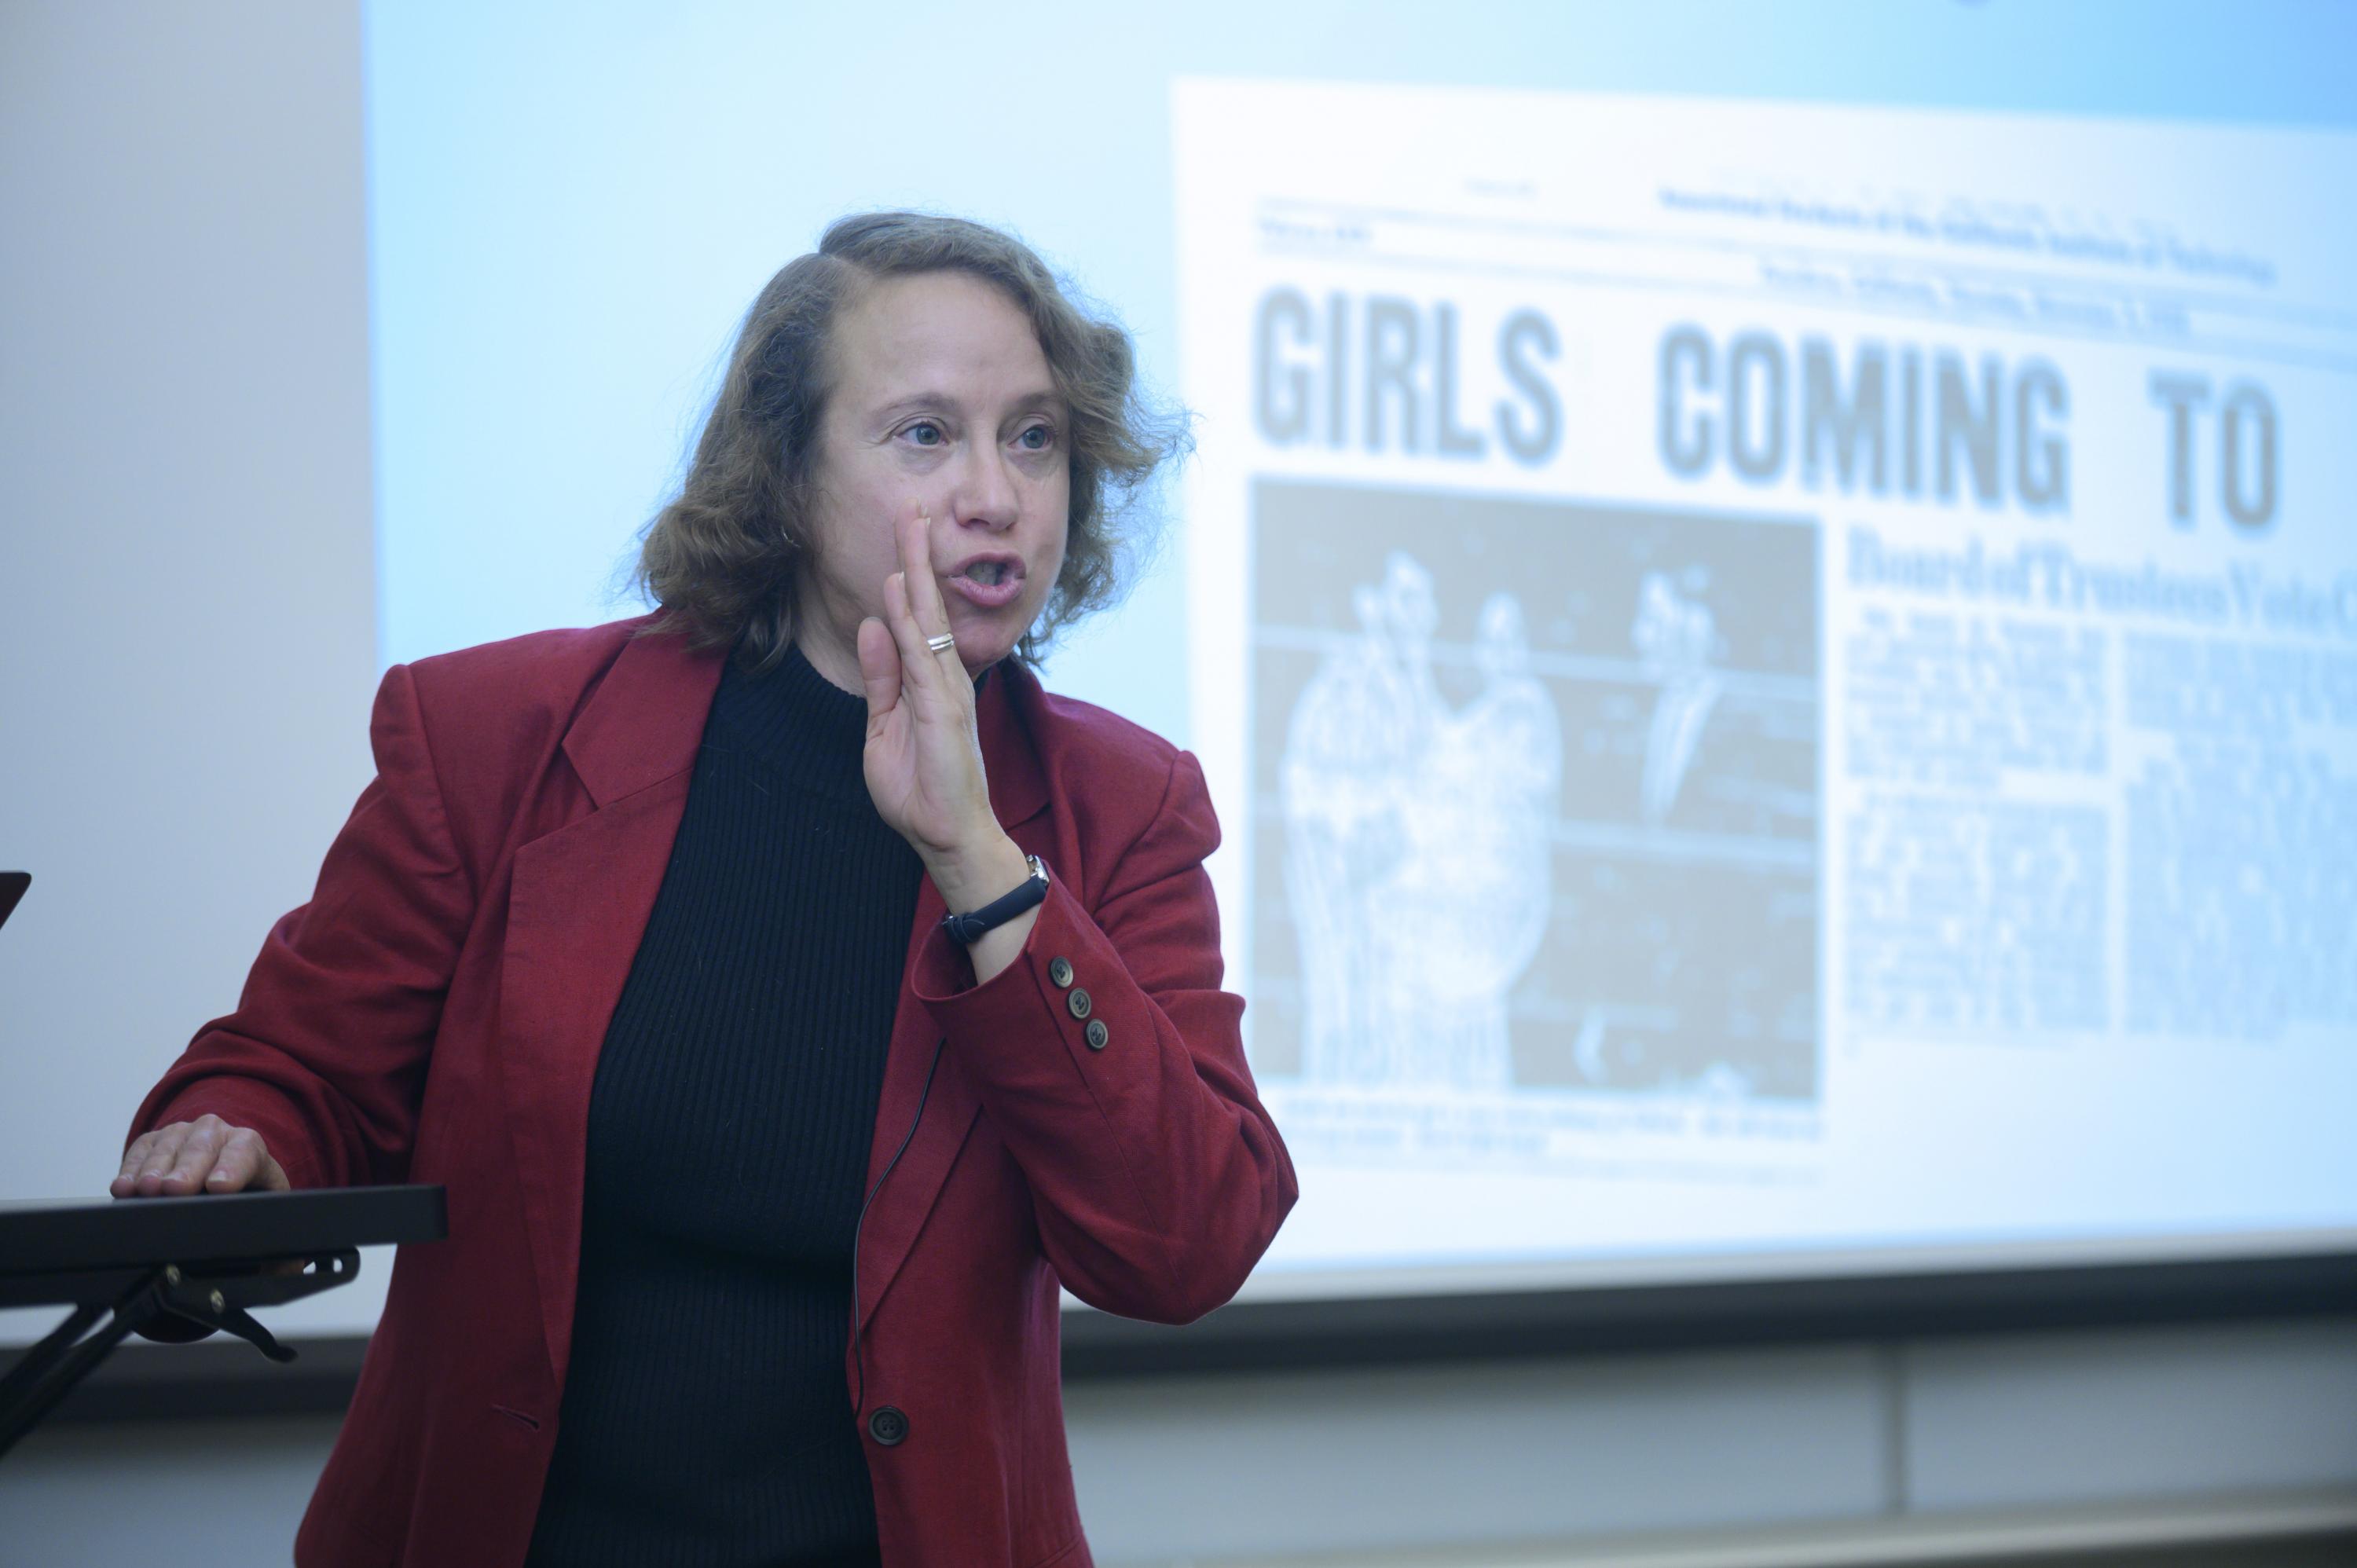 Historian Amy Bix explores the hurdles women have overcome — and sitll face — in engineering and STEM education.